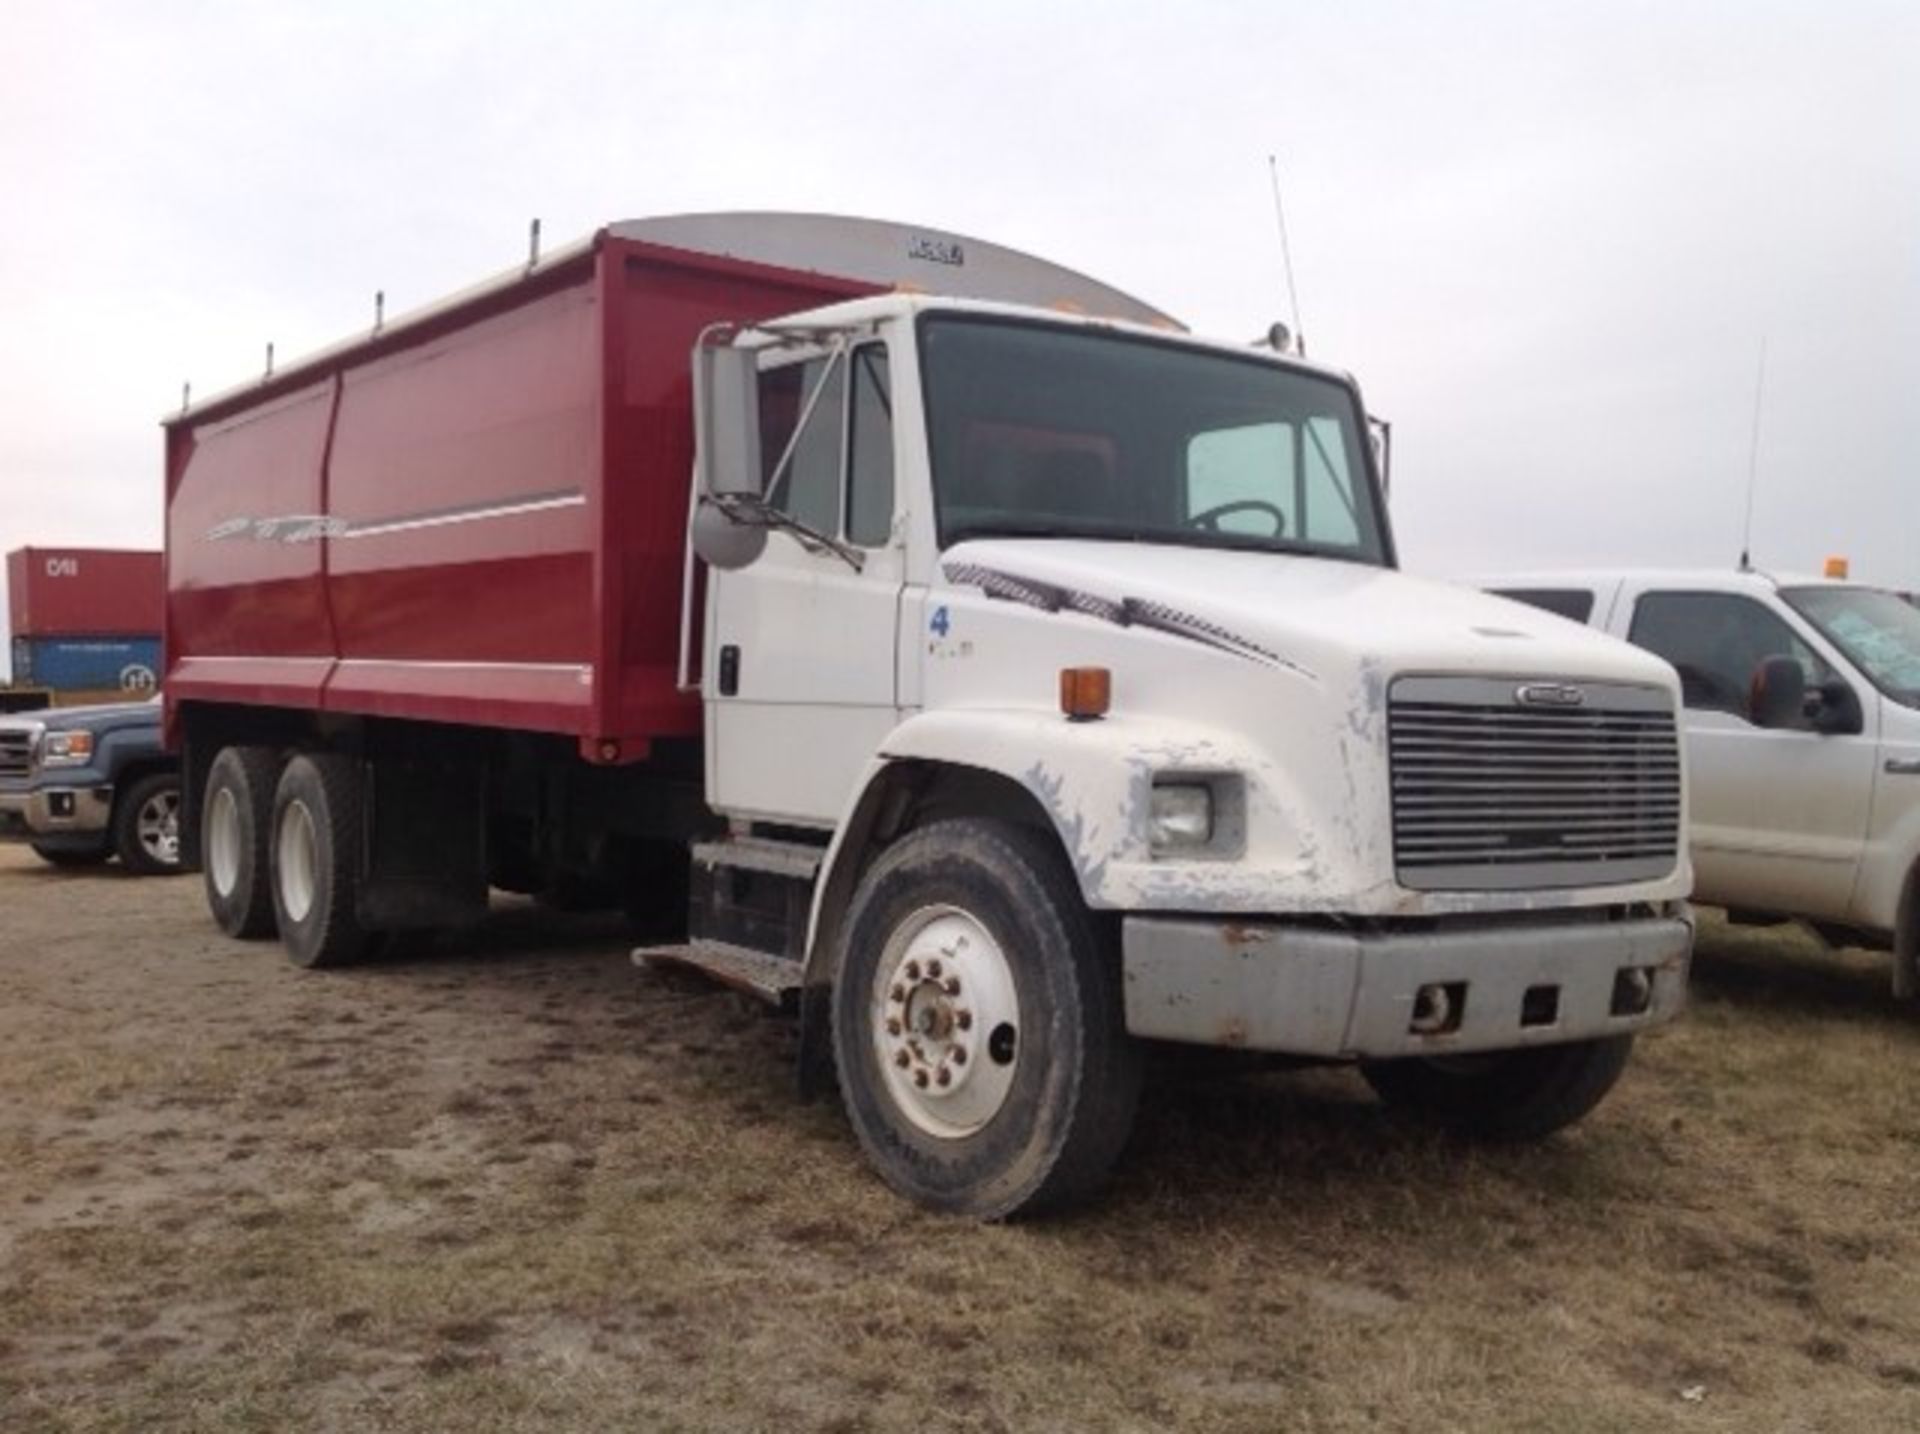 1996 Freightliner Grain truck with box and remote control hoist and end gate. Vin# 1FVX0LBBXTL710591 - Image 3 of 4